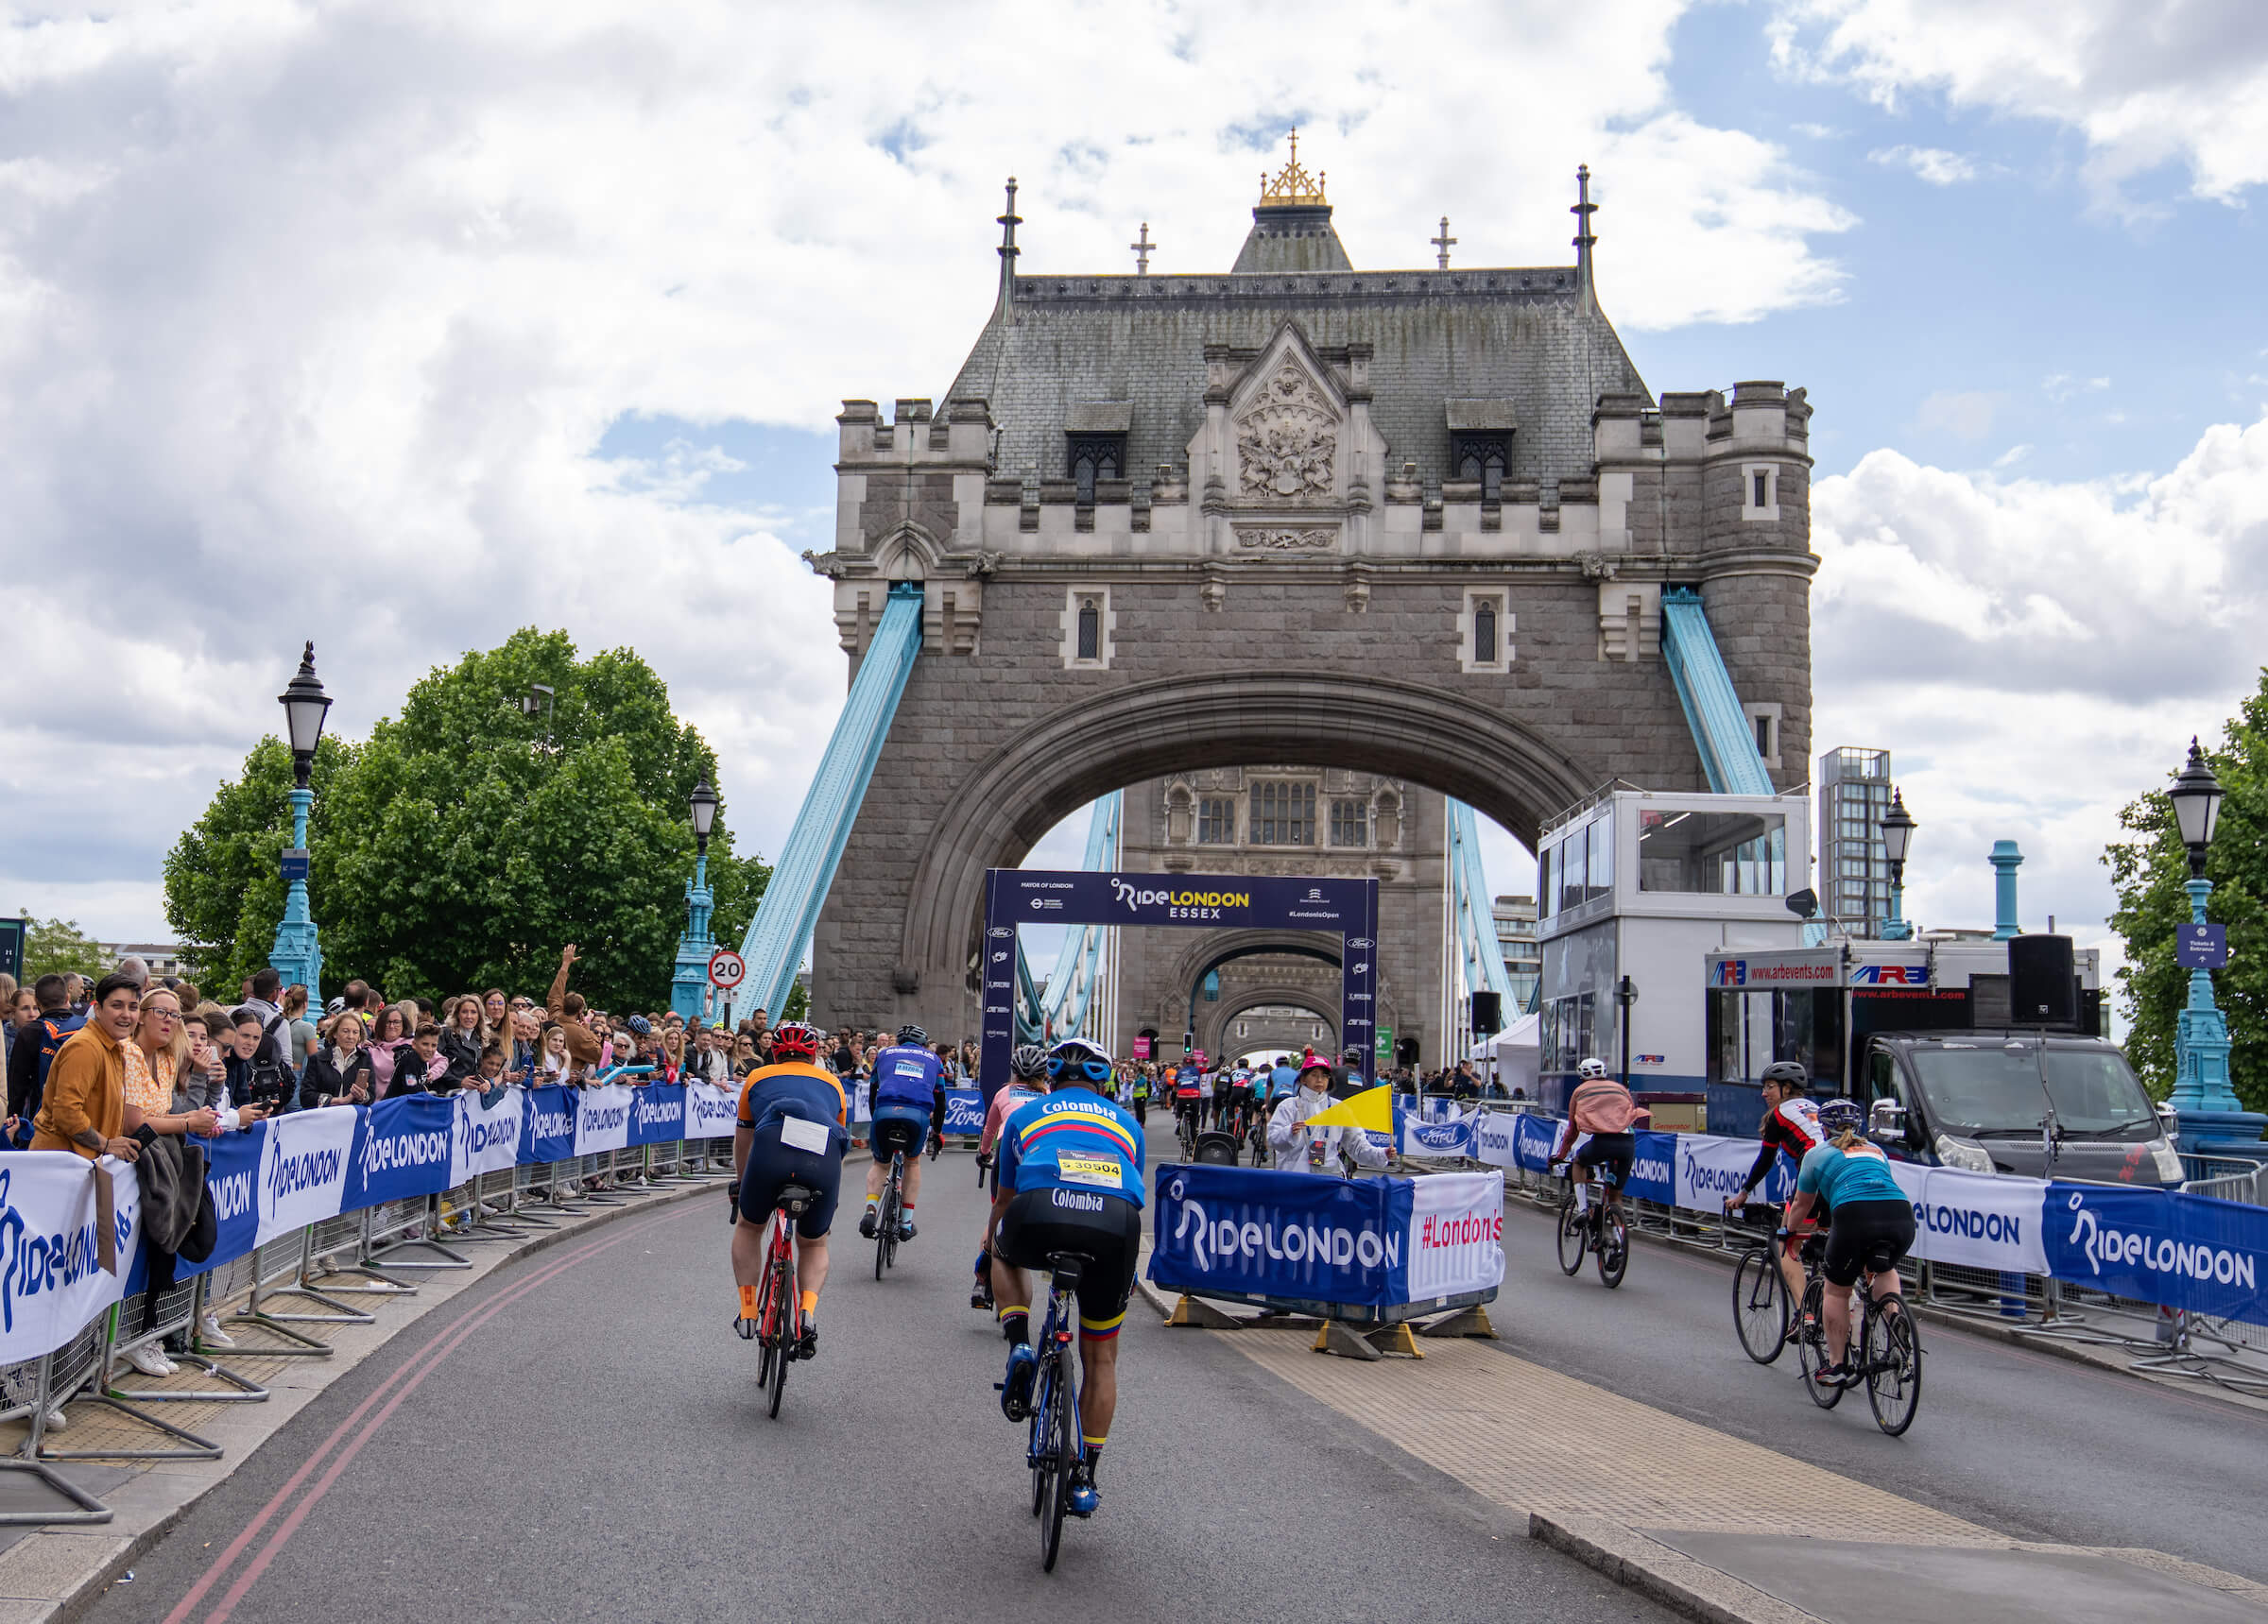 Riders from behind at Tower Bridge